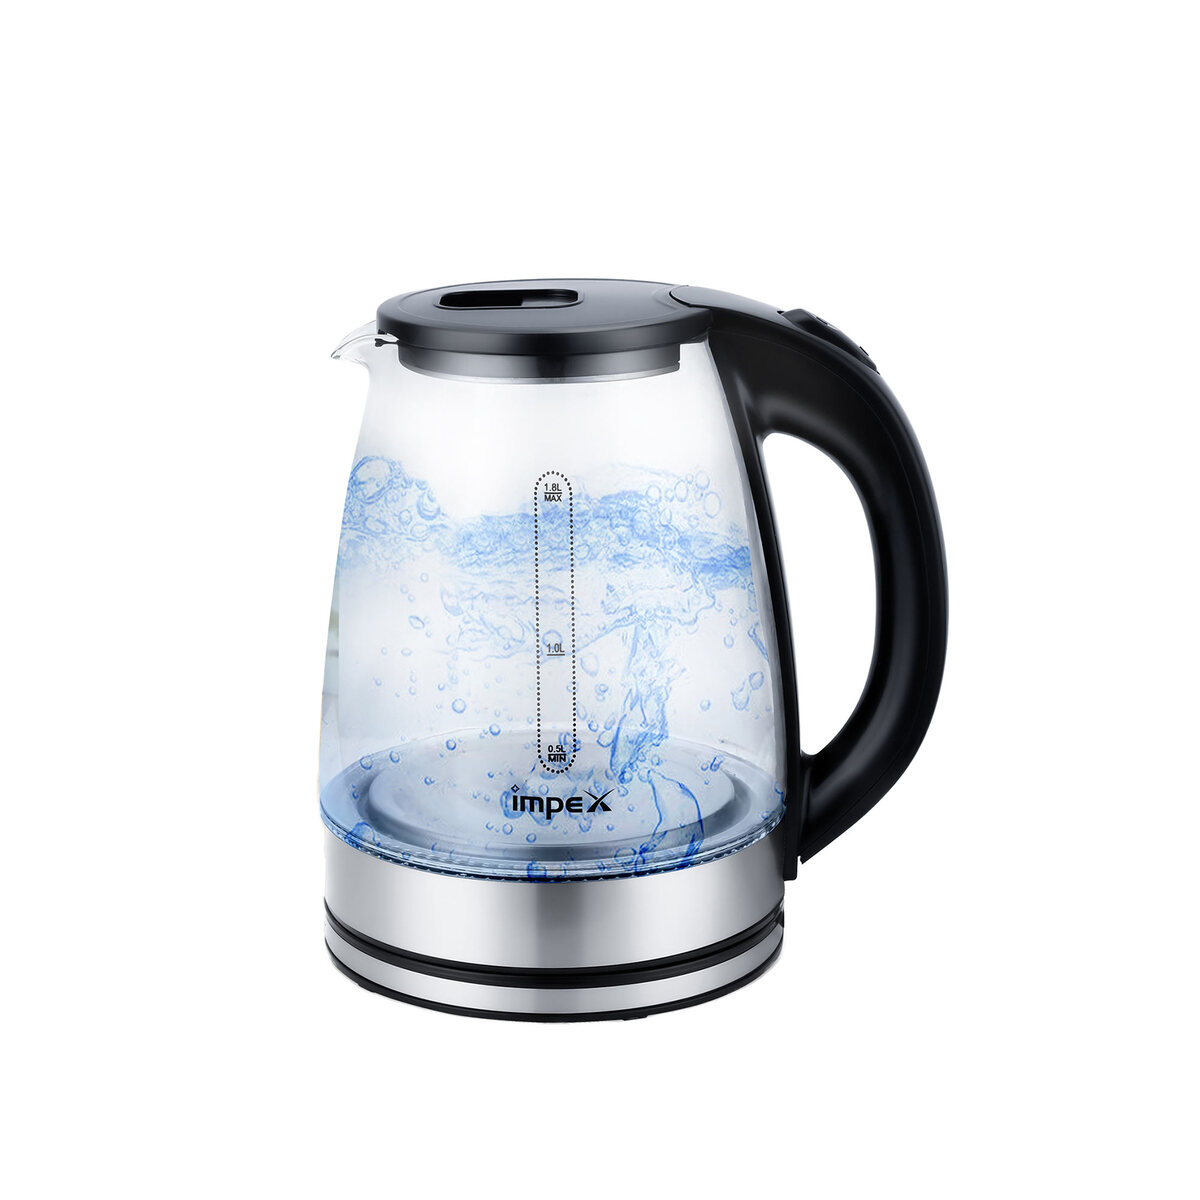 Impex Electric Kettle Steamer 1805 1.8L